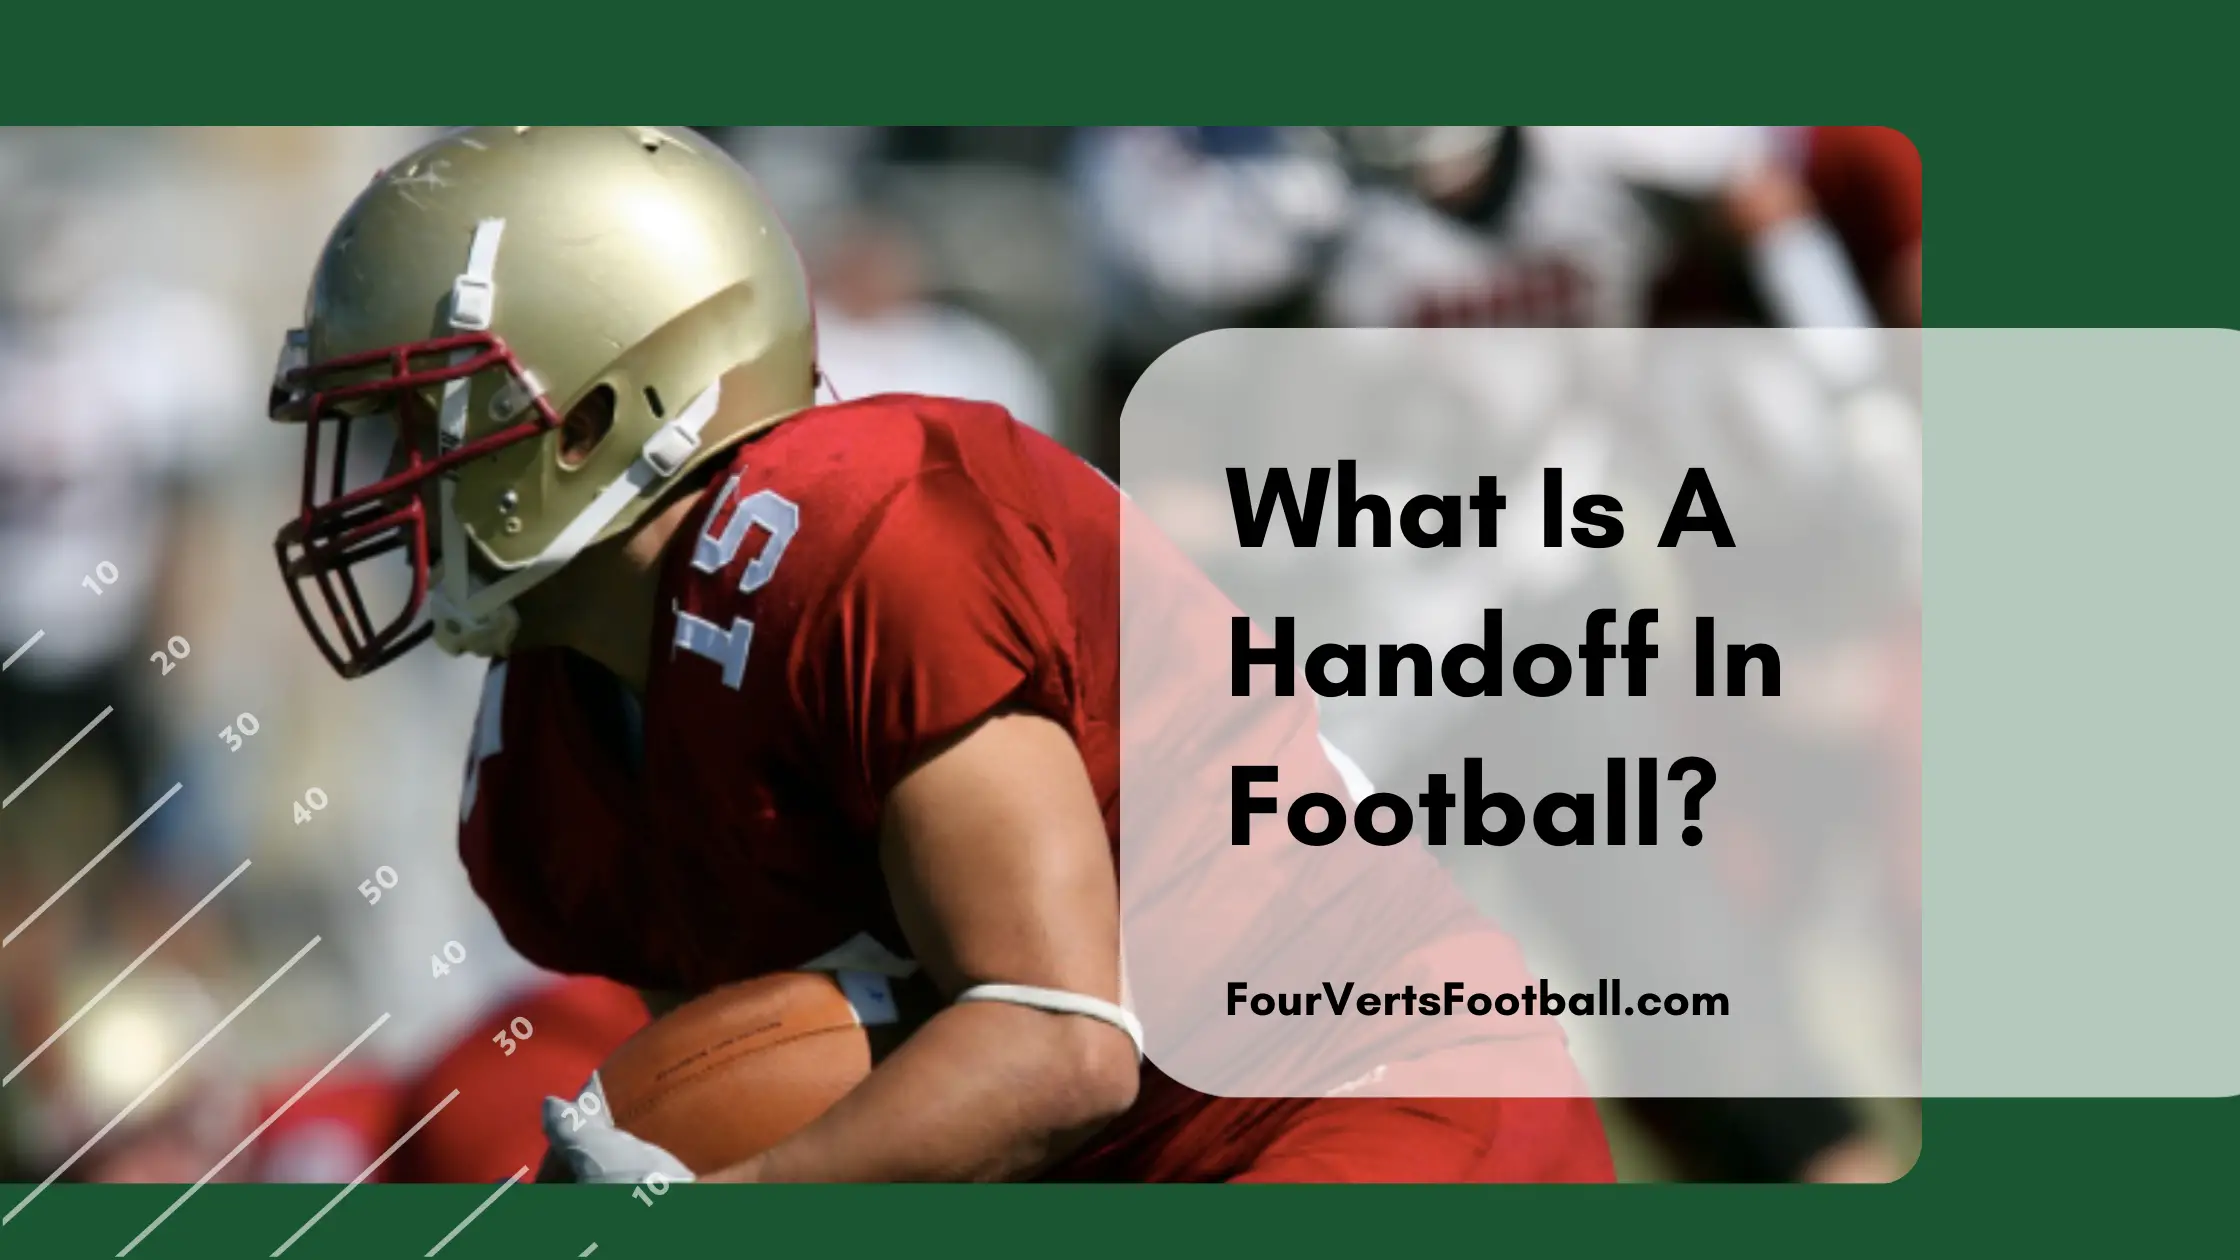 What Is A Handoff In Football?